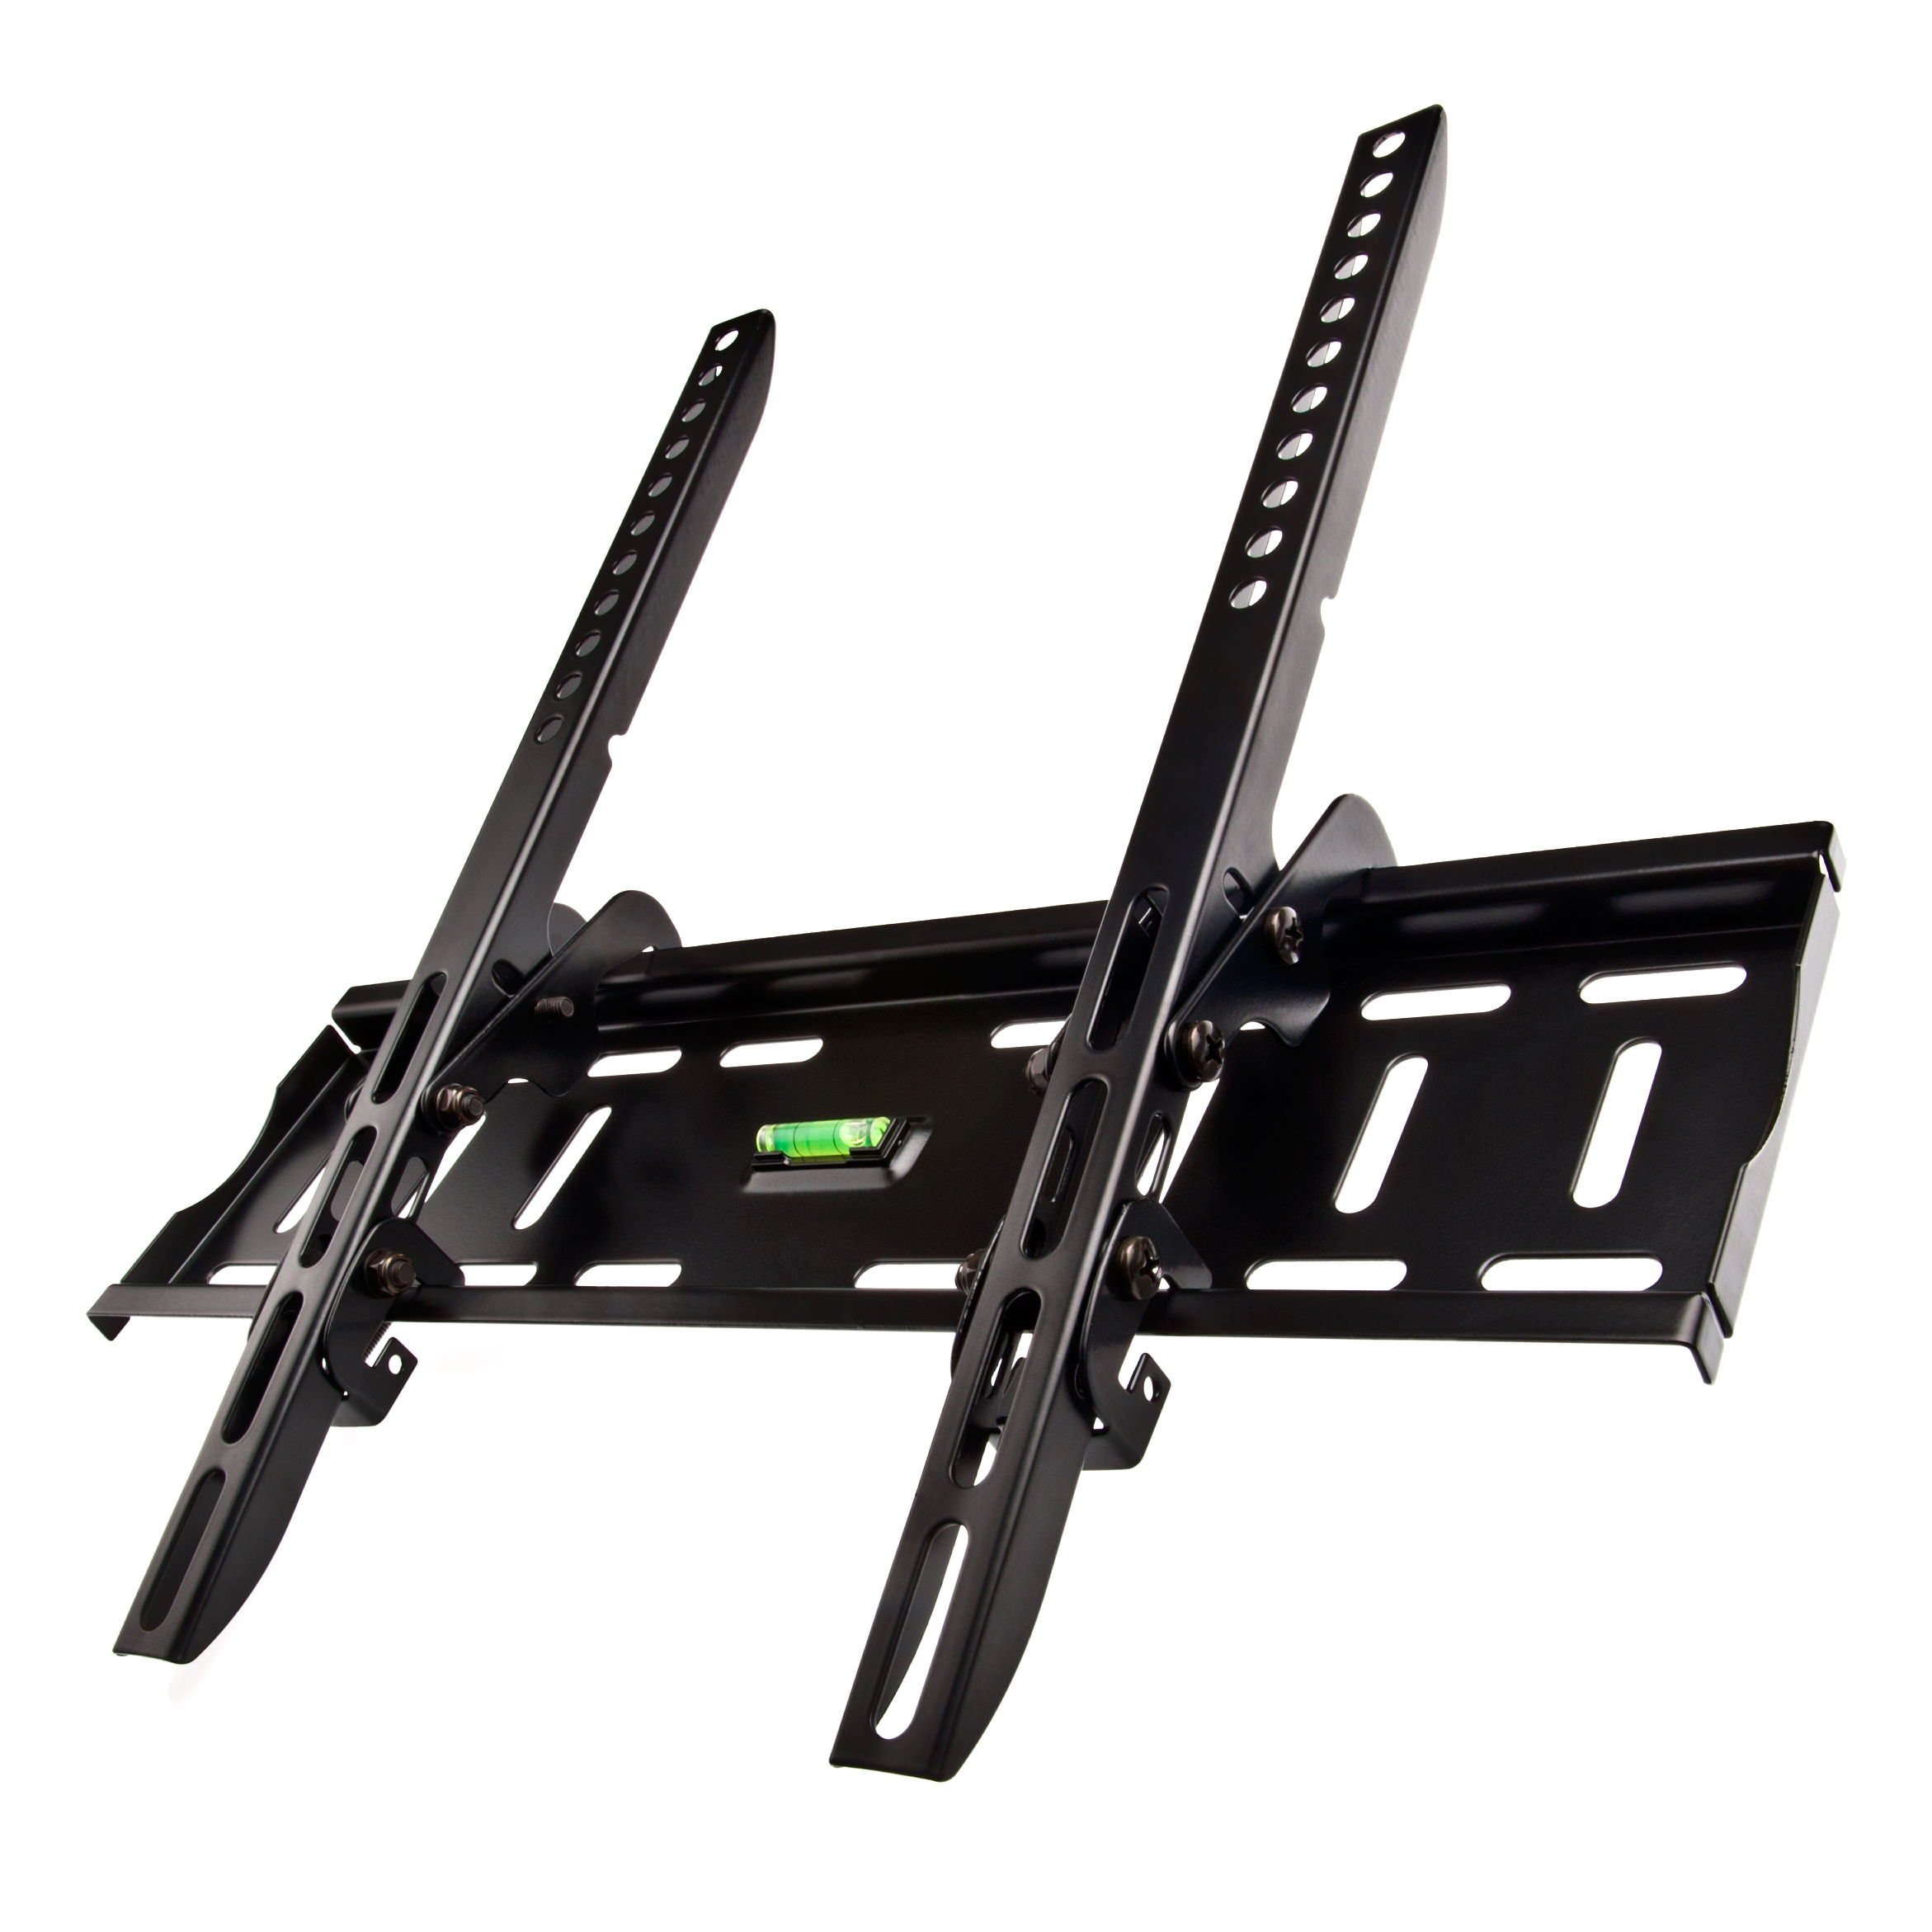 YouSave Accessories Slim Compact Tilting TV Wall Bracket 